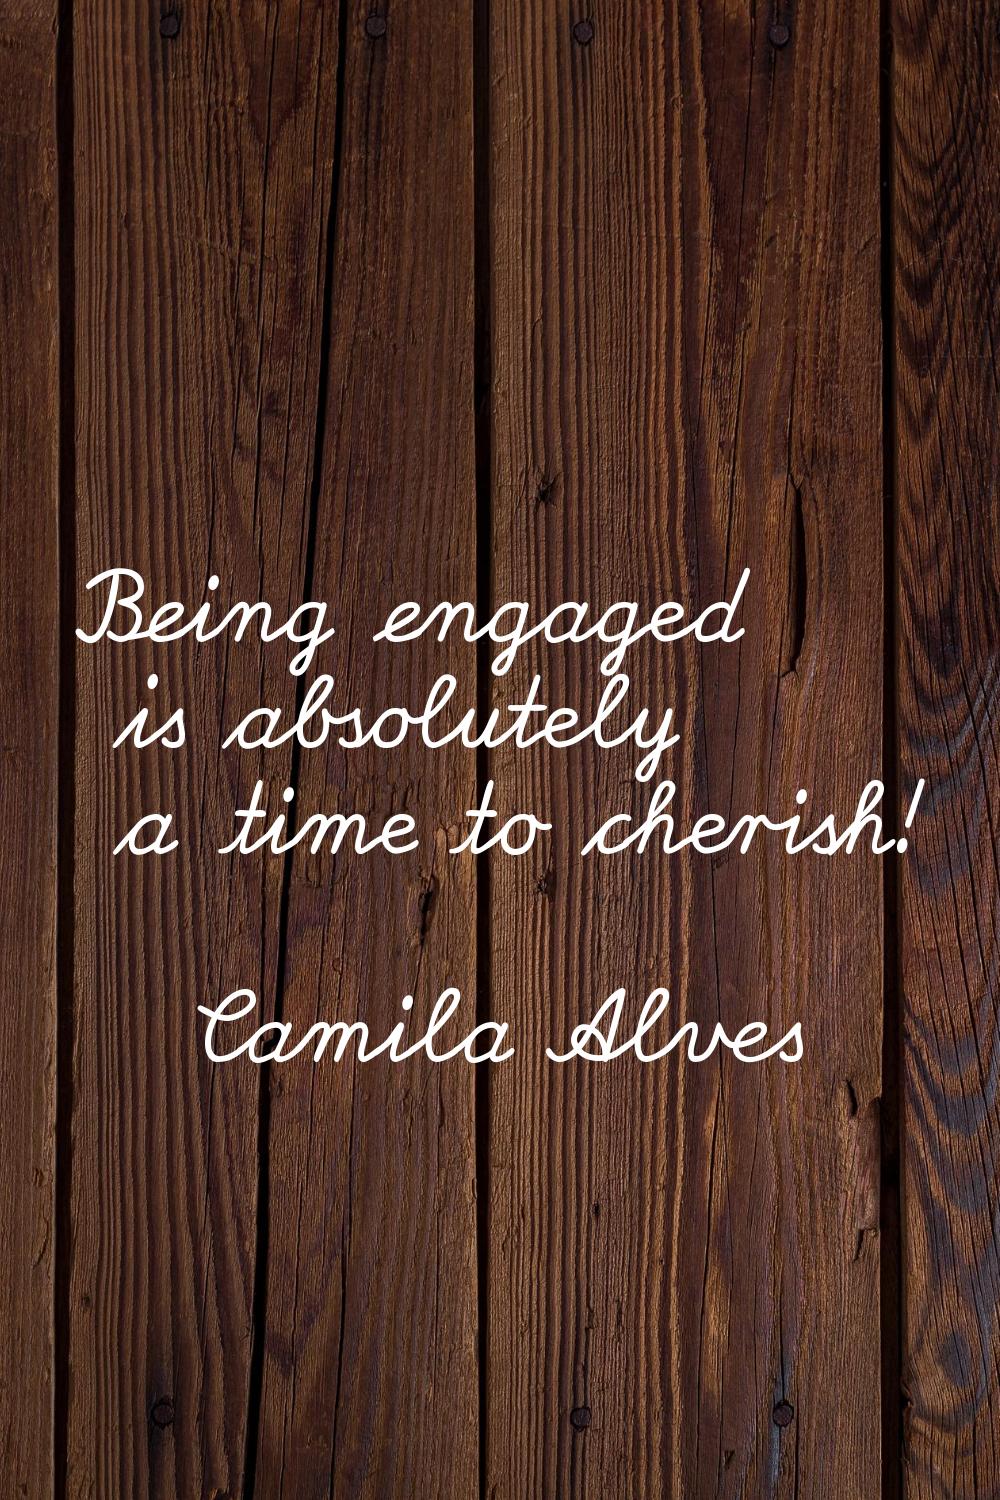 Being engaged is absolutely a time to cherish!